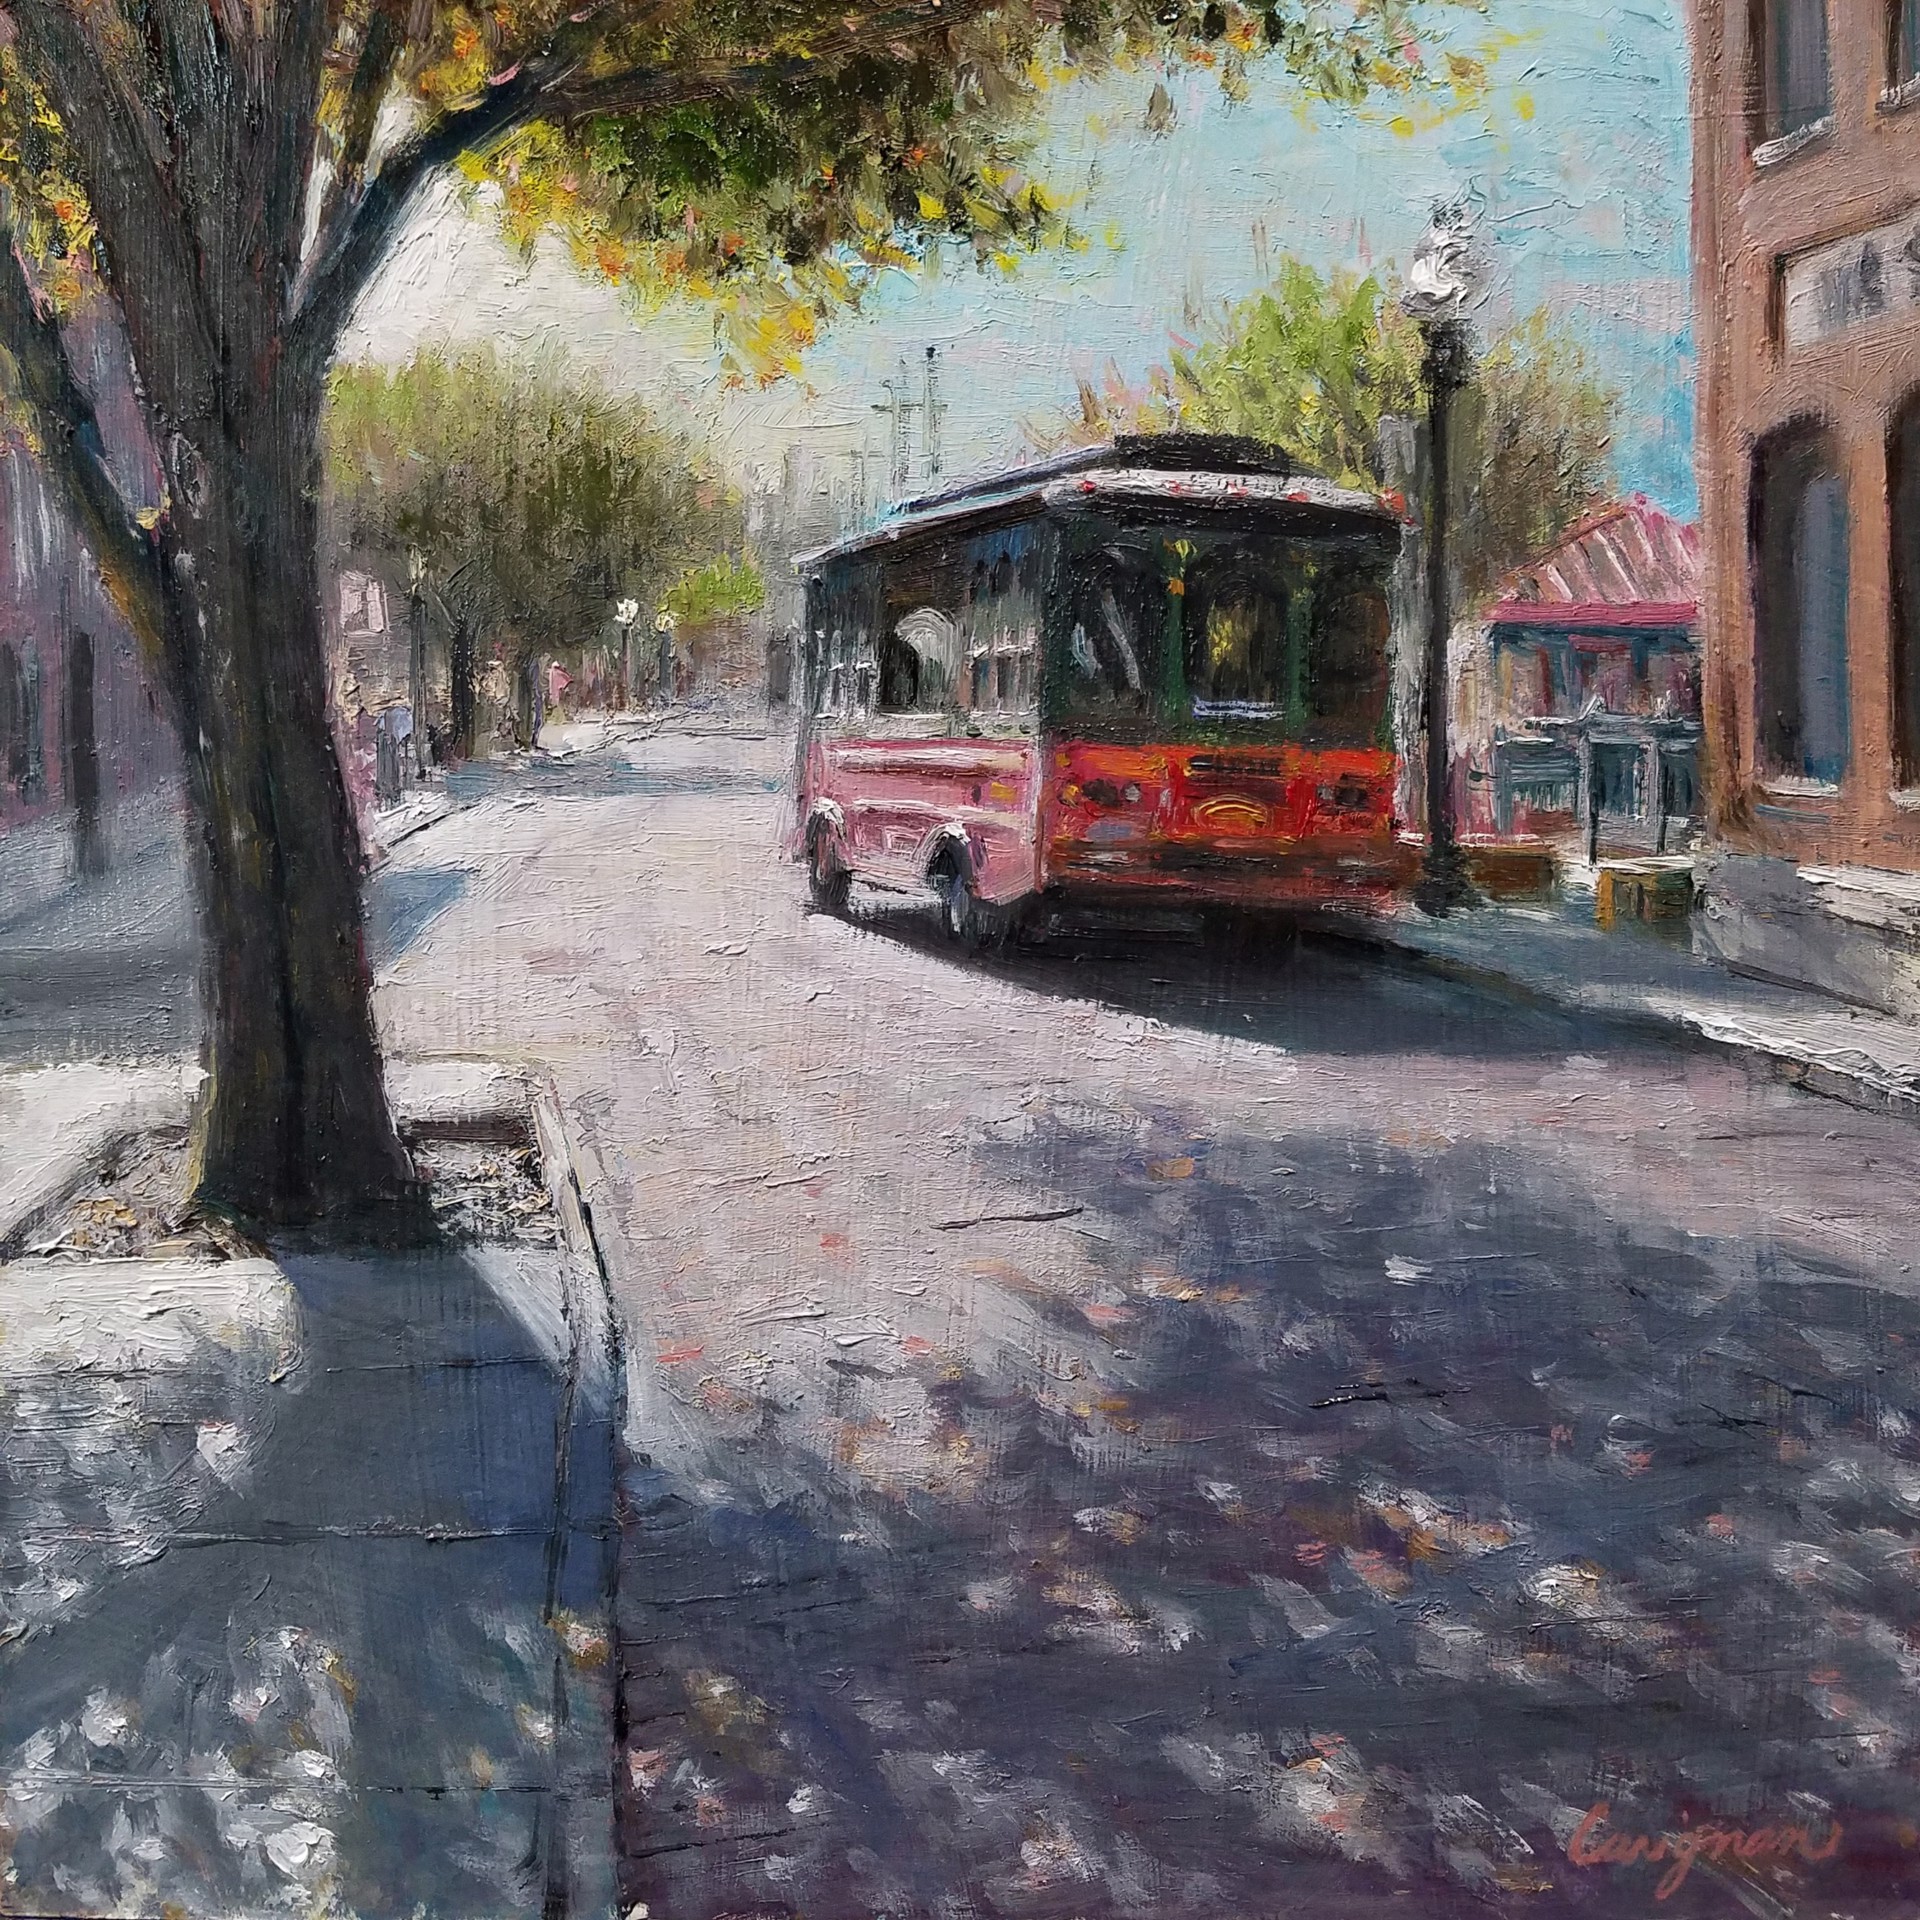 Trolley Stop by Todd Carignan